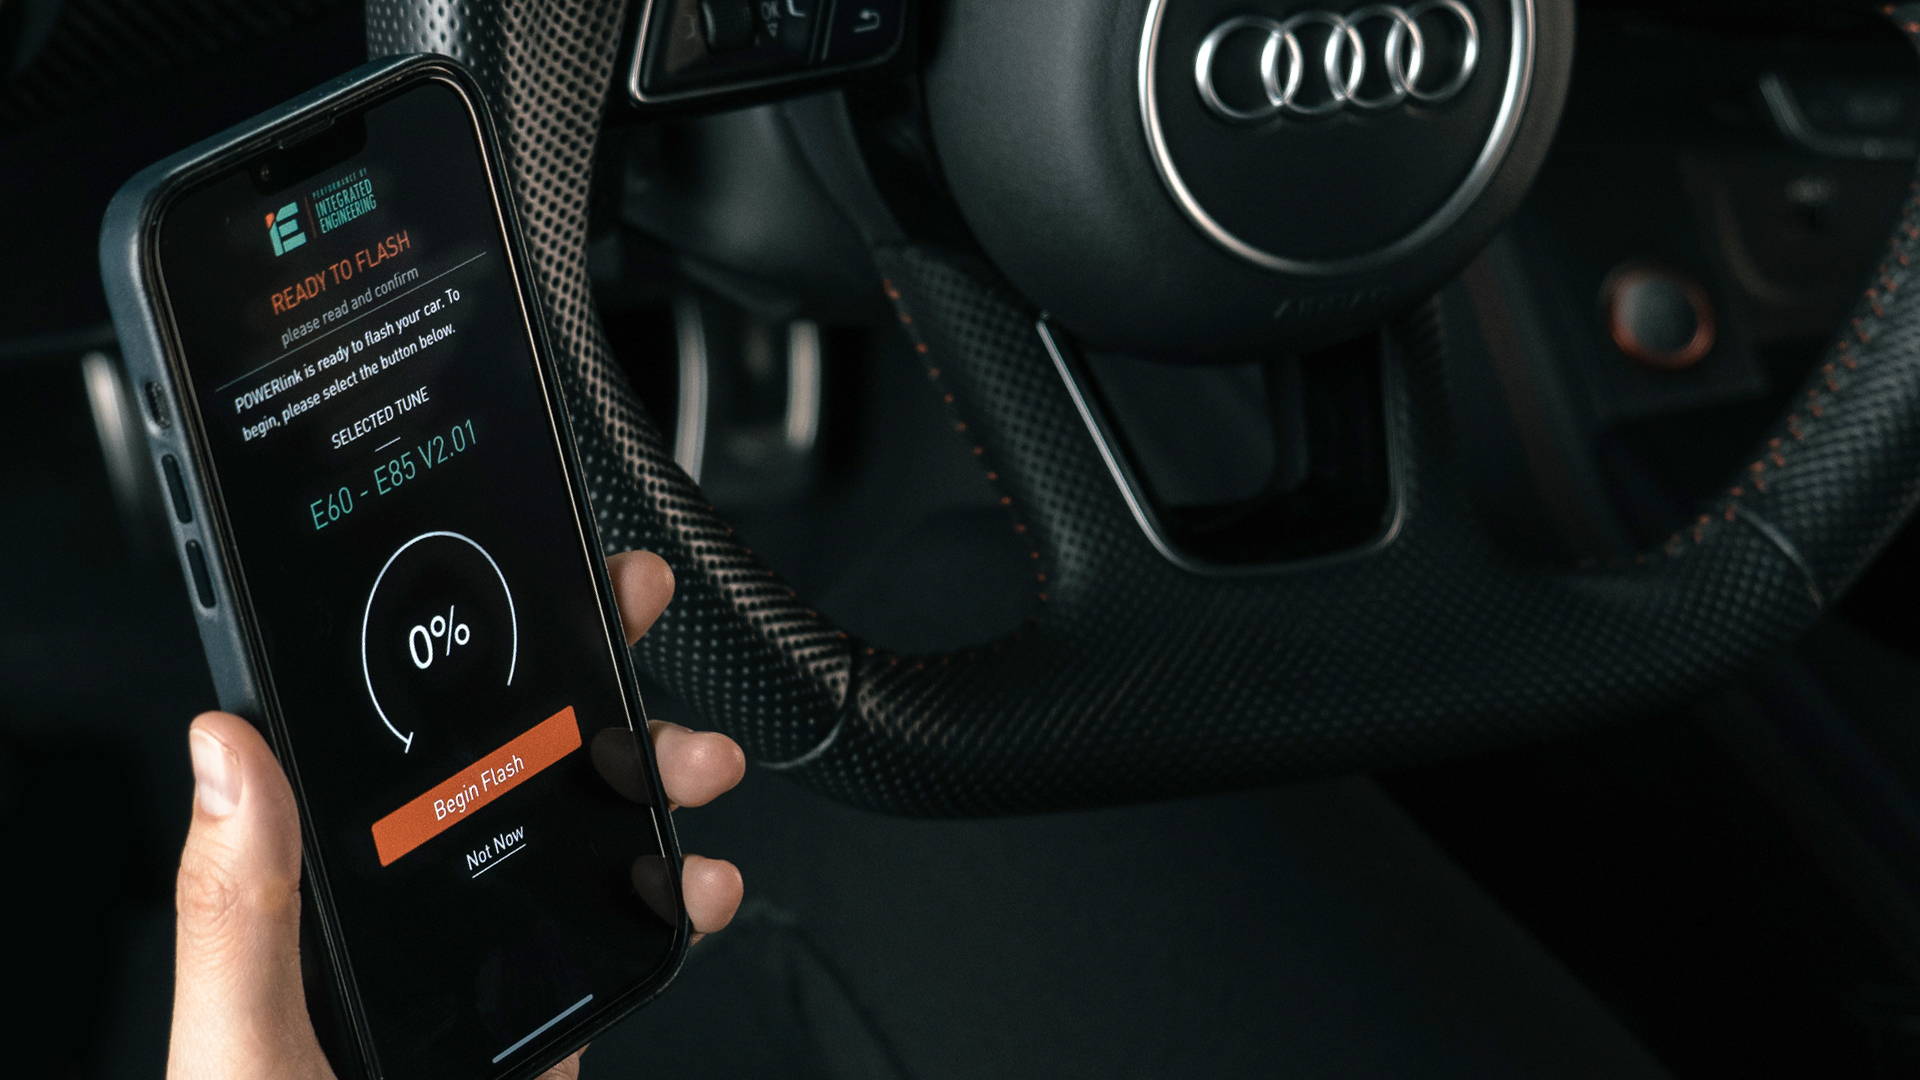 Showroom mode on S6 C8 with ODBEleven : r/Audi